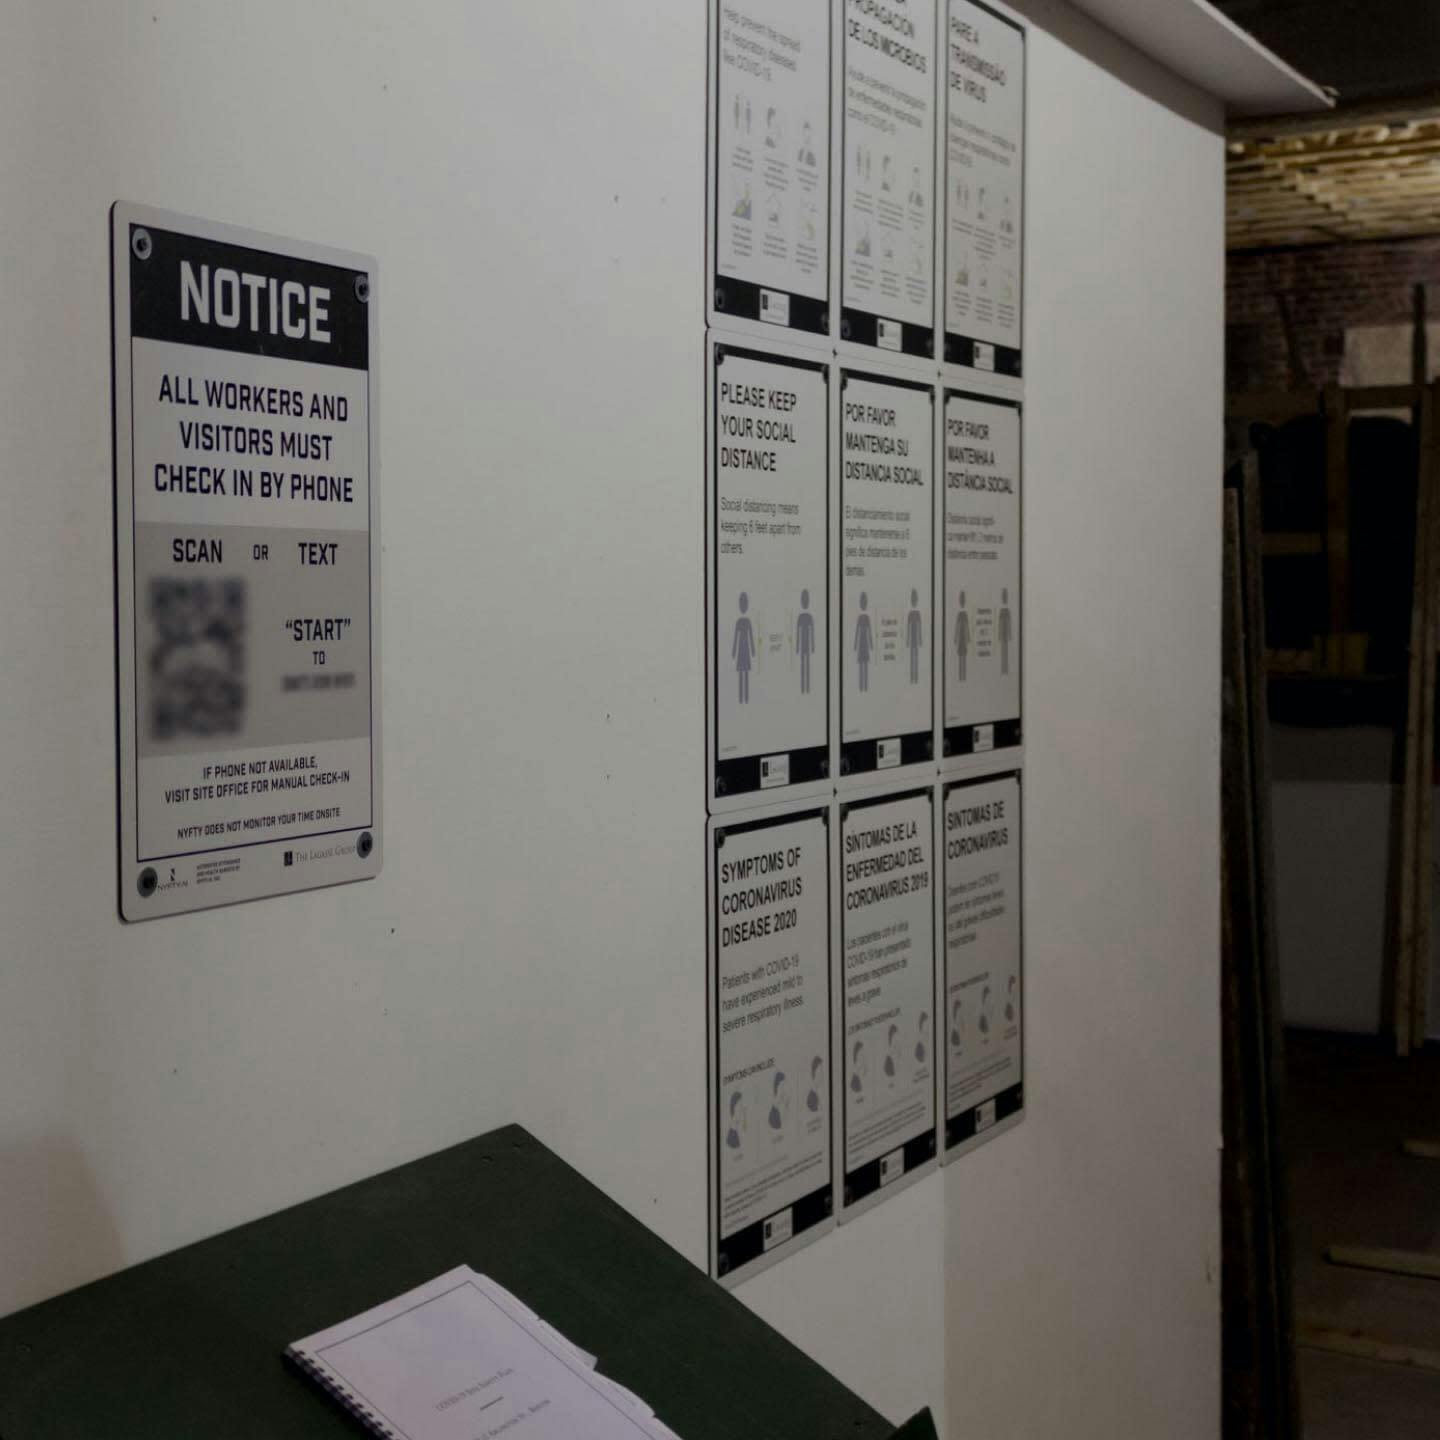 Posted COVID-19 safety signs in construction office